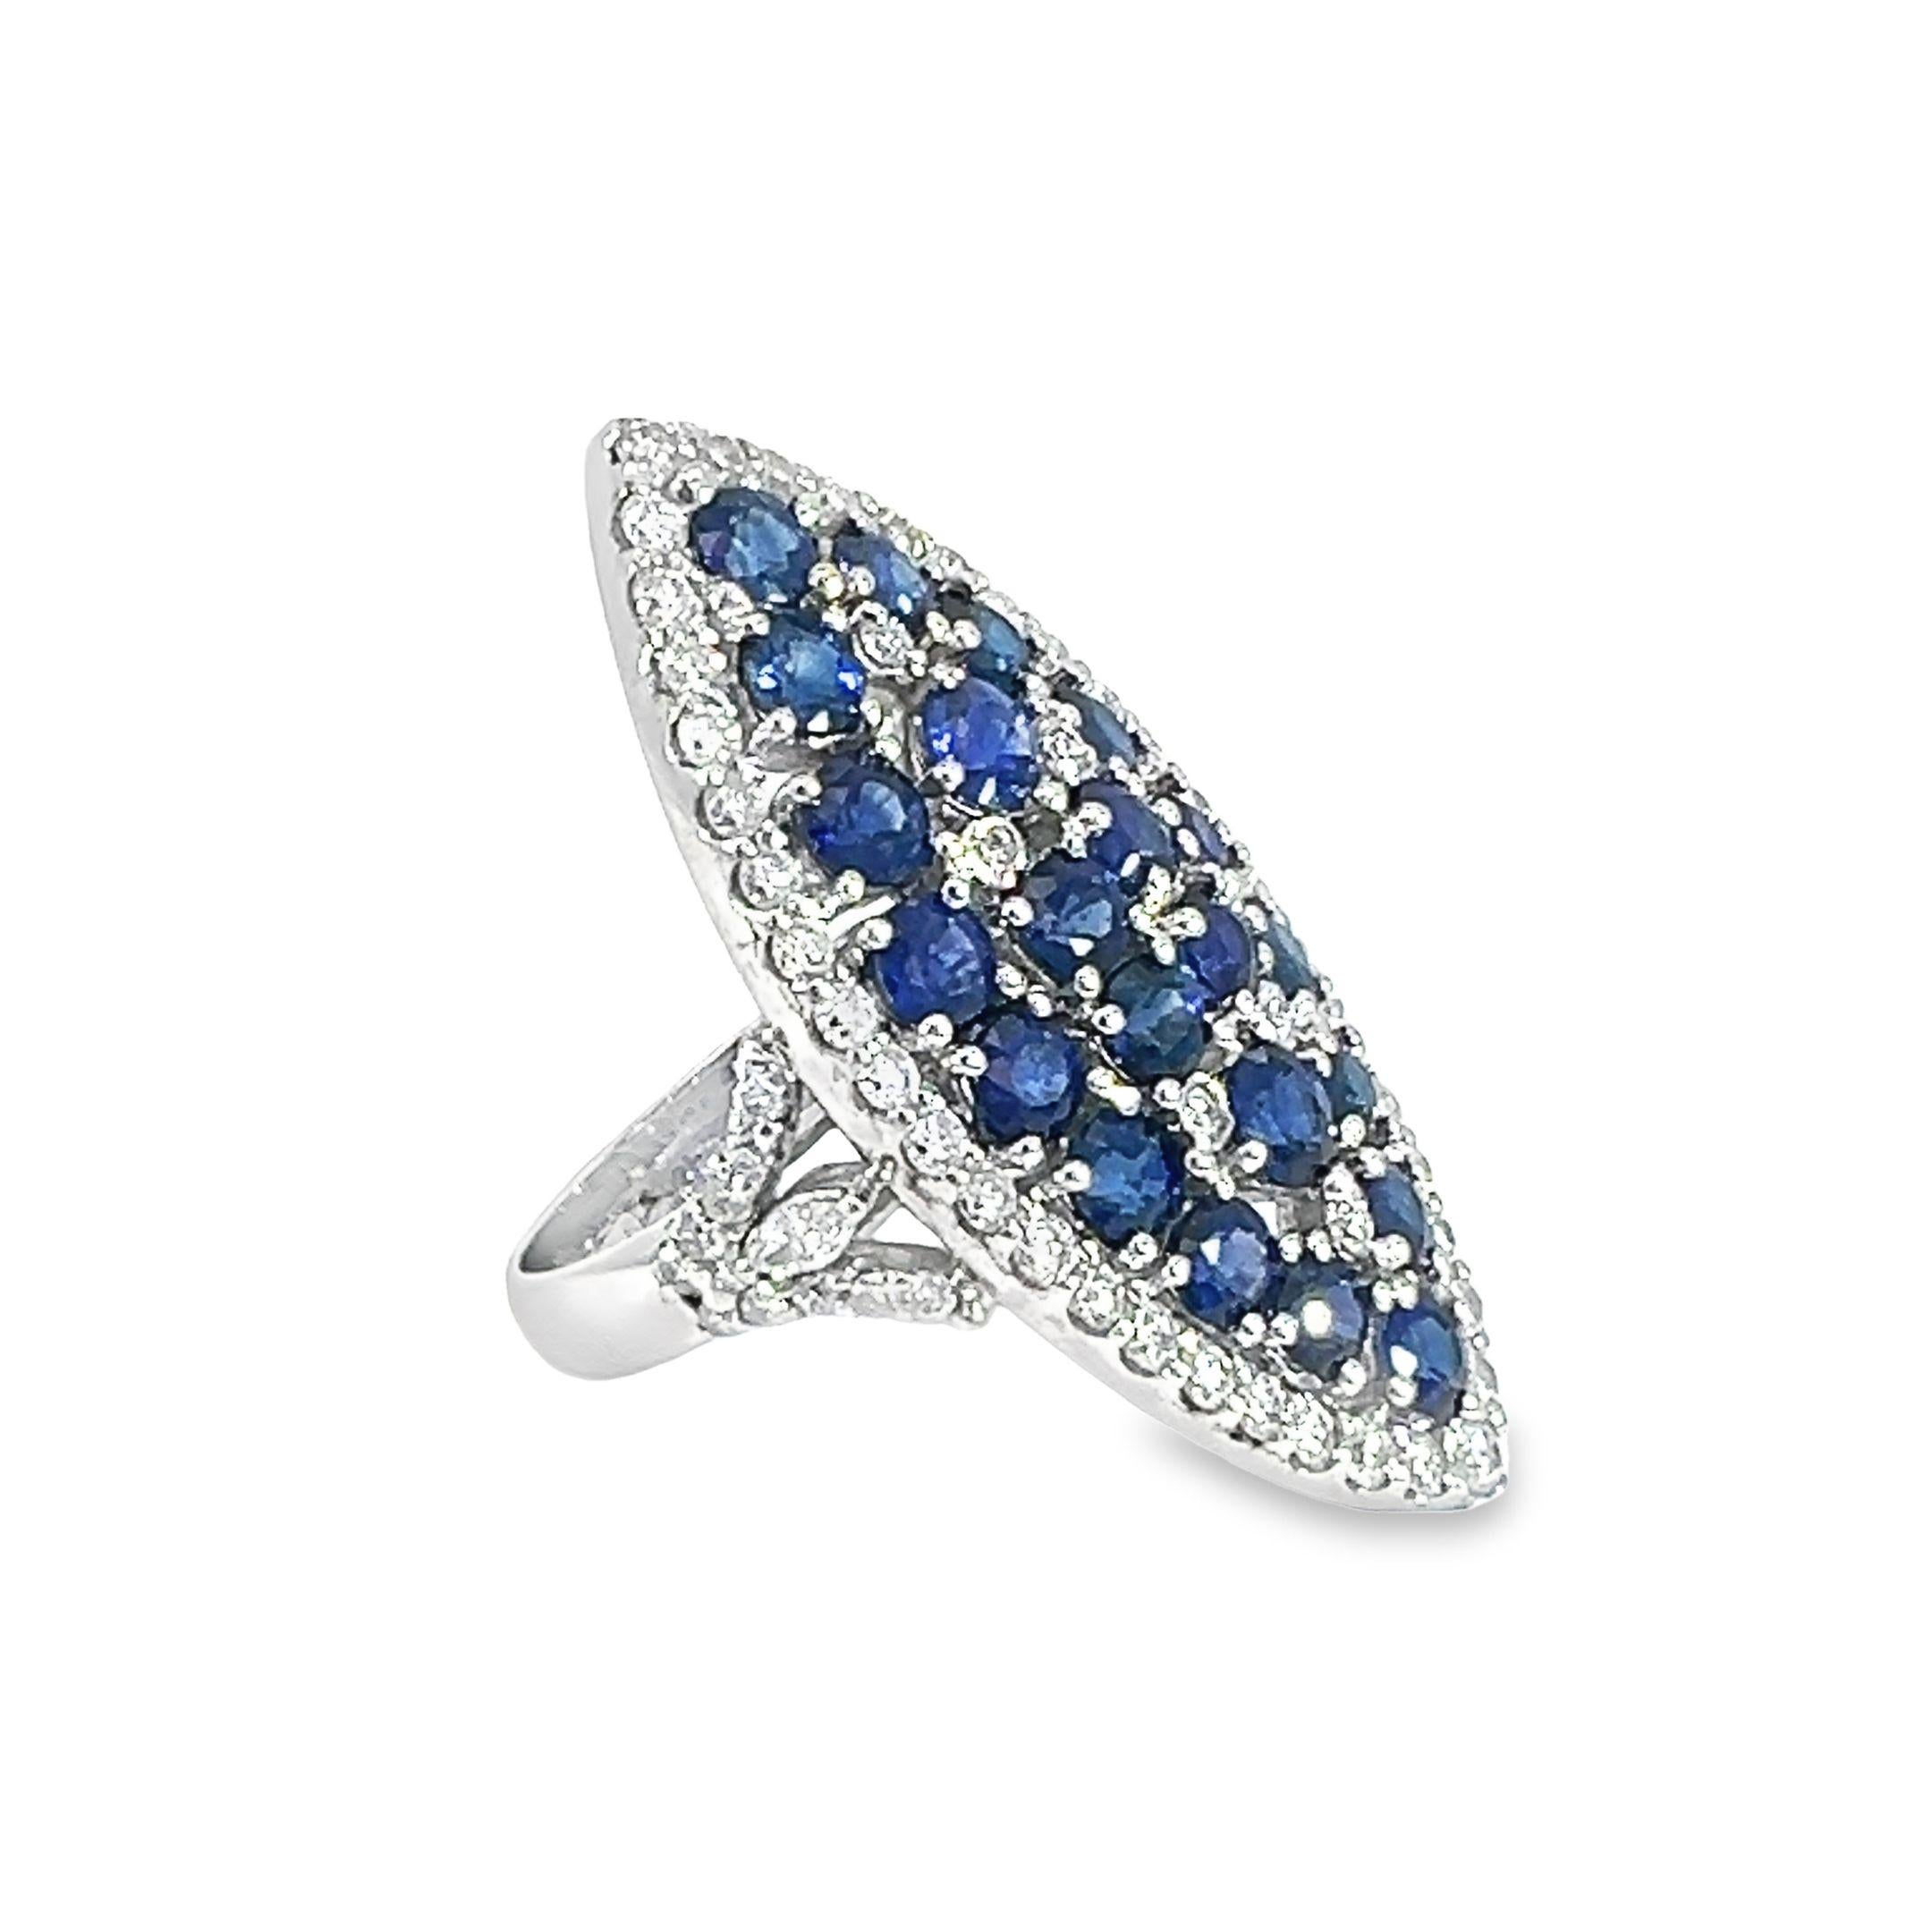 A Stunning beautiful Natural 4.32-carat sapphire and 1.80-carat diamond ring. 
Sapphire diamond features with a dazzling cluster of deep blue sapphire surrounded by a halo of diamonds.  For special occasions, the marquise shape perfectly highlights